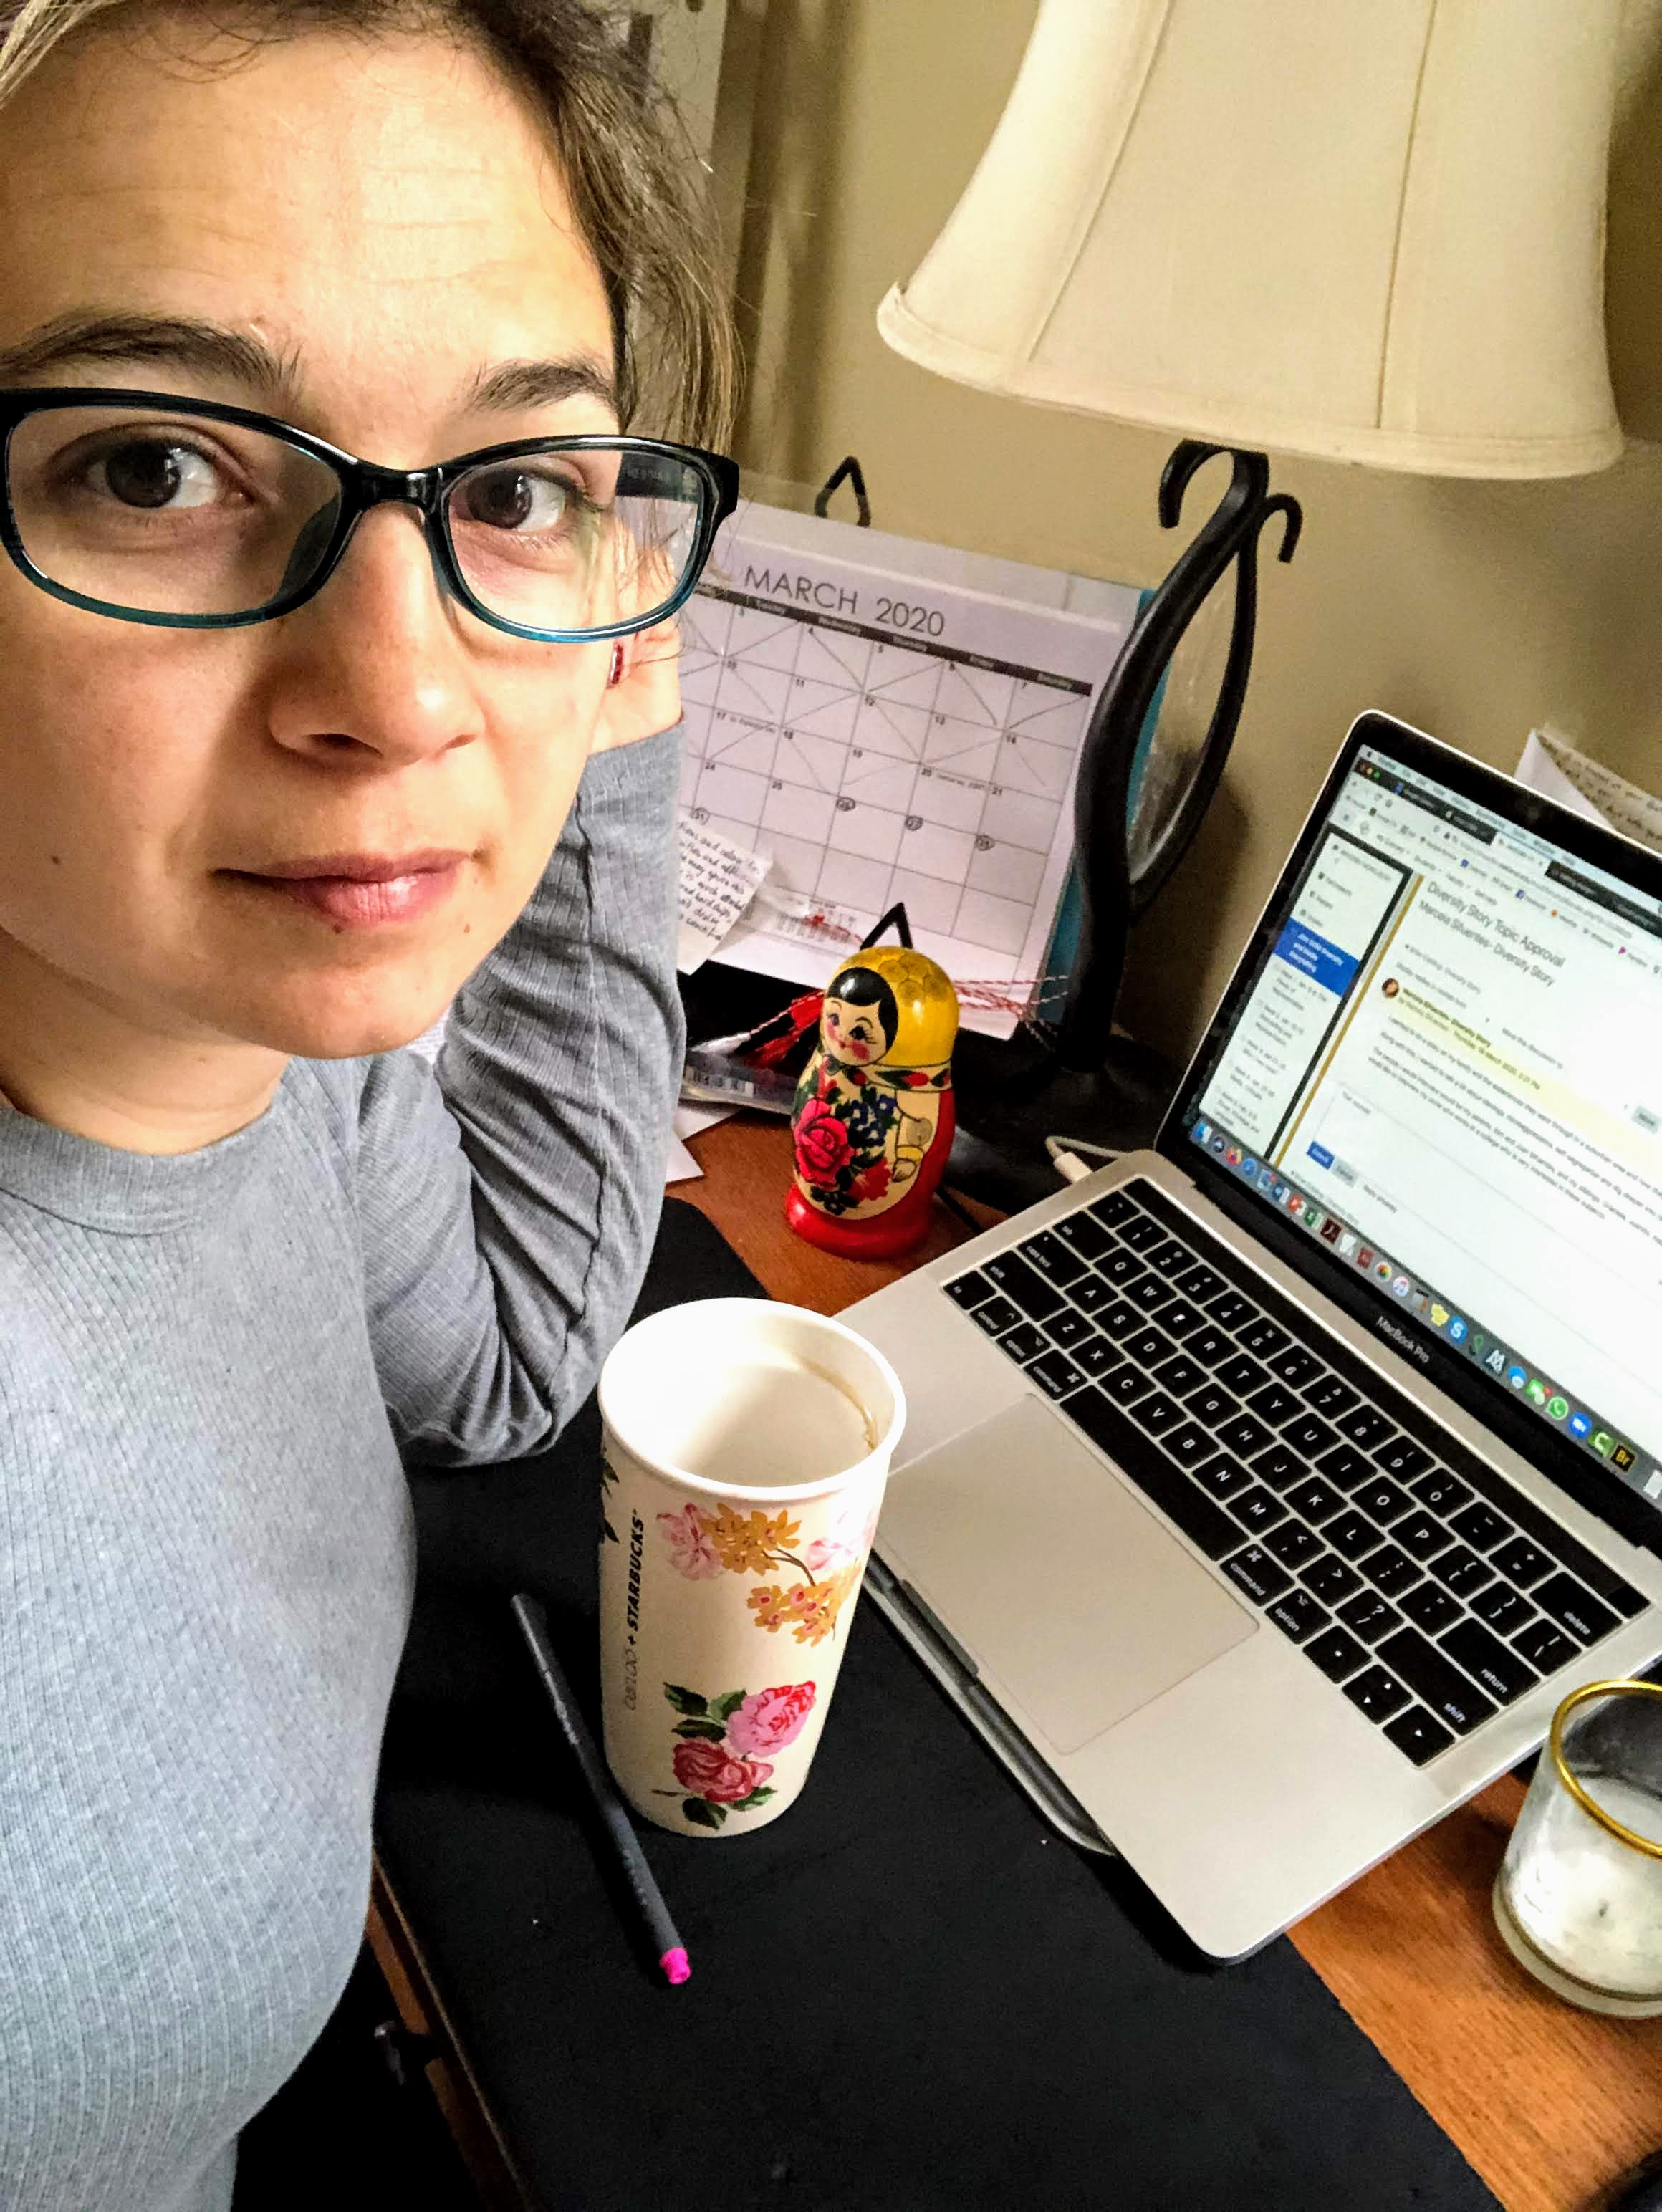 Woman in front of laptop, with coffee mug, calendar in the background